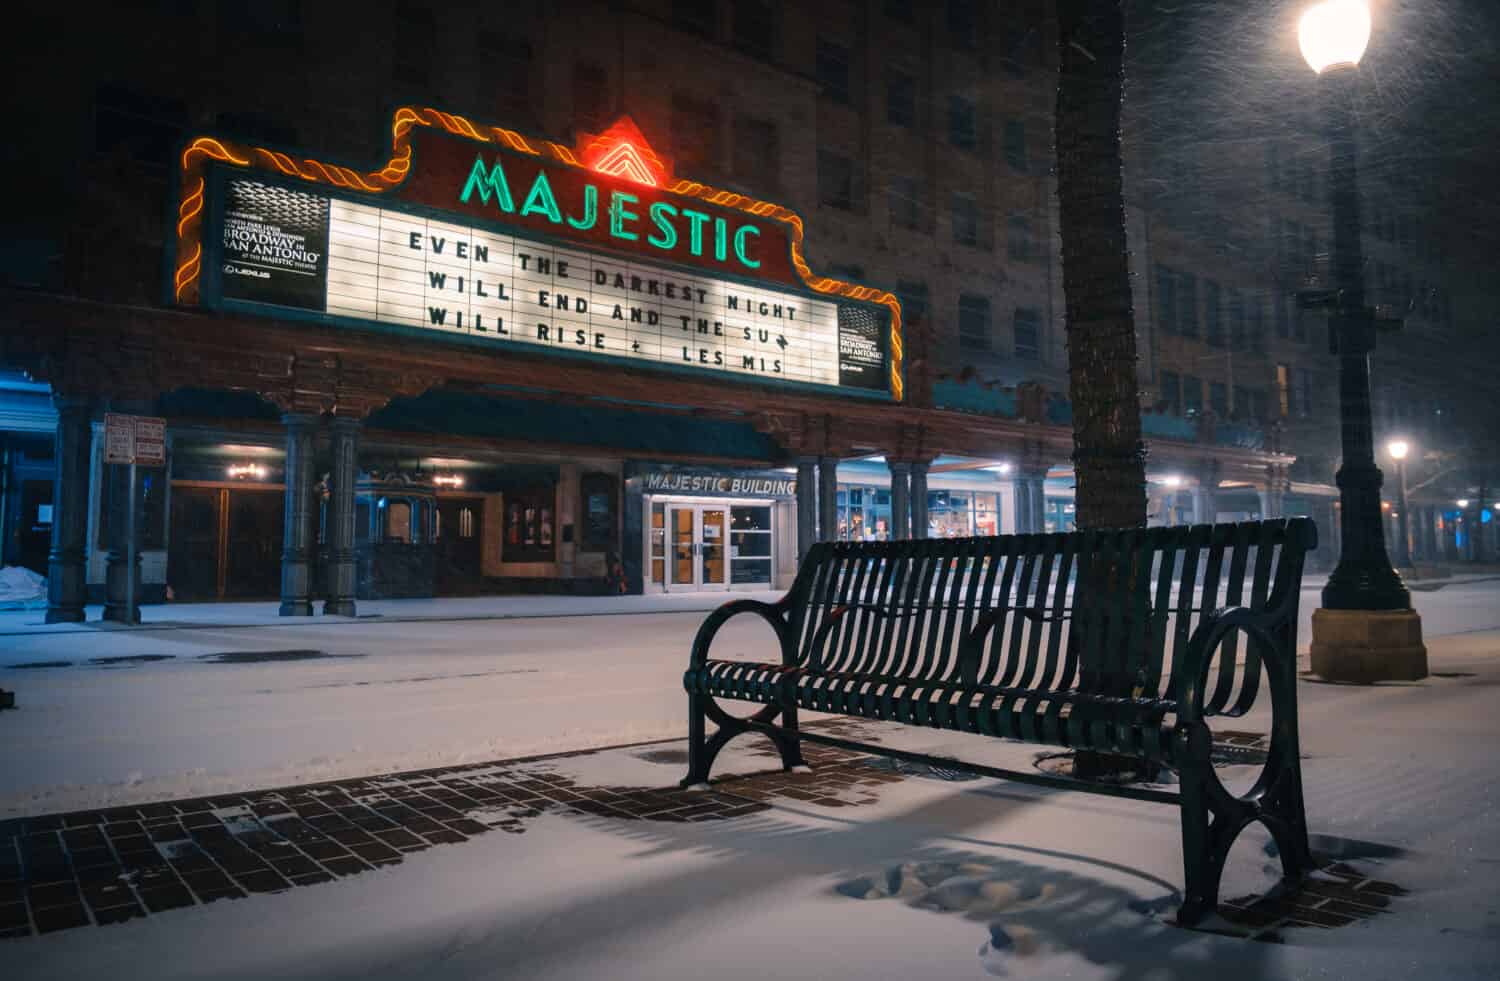 Snow Day at the Majestic Theater in San antonio, Texas. Snowy winter weather after a blizzard snow storm in Winter